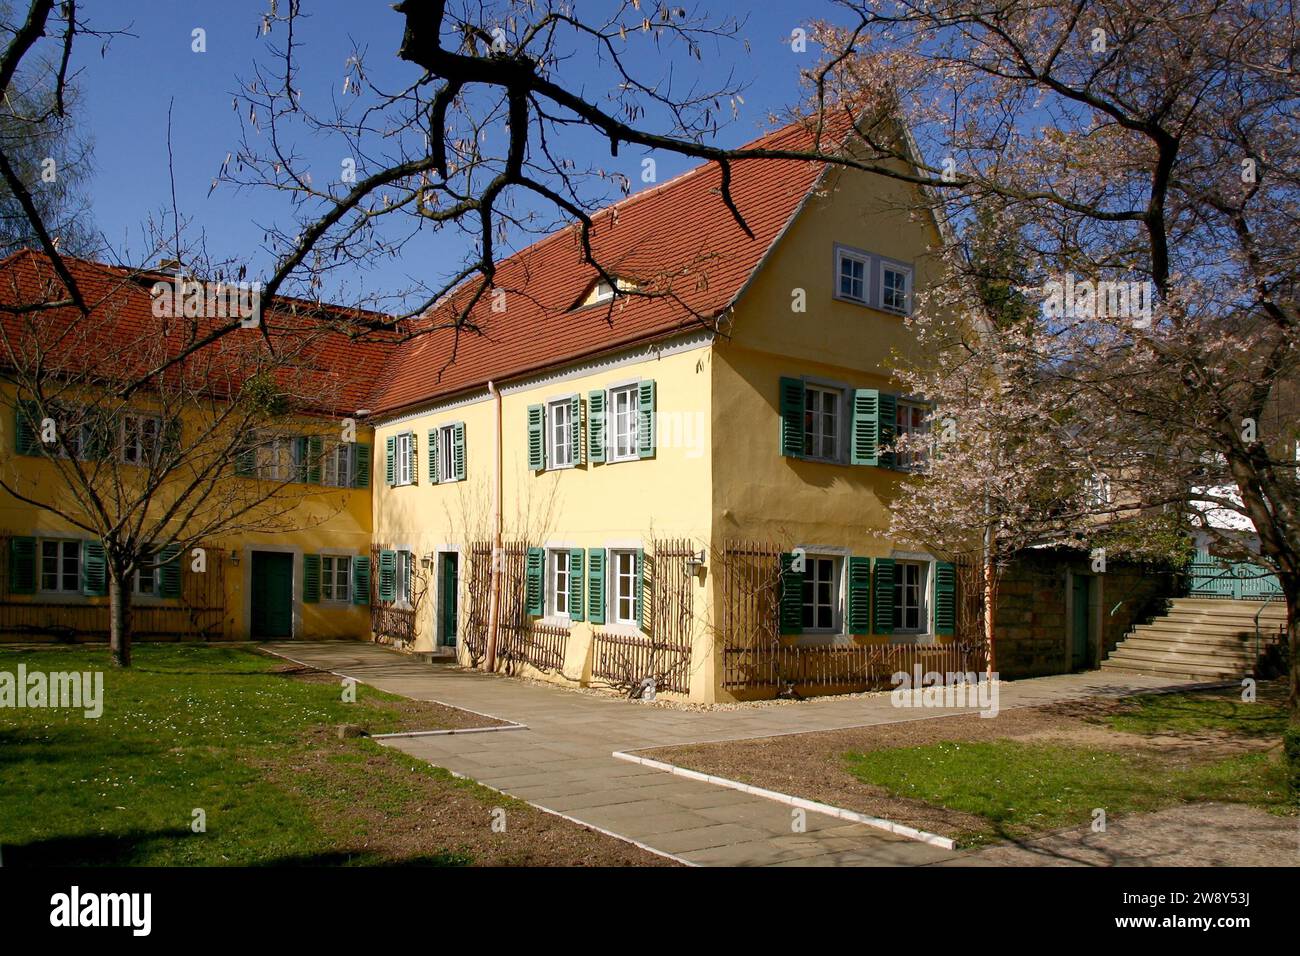 Carl Maria von Weber Museum, Hosterwitz, Dresdner Str. 44. Carl Maria von Weber (1786-1826) lived in the former winegrower's house after 1818 (Carl Stock Photo